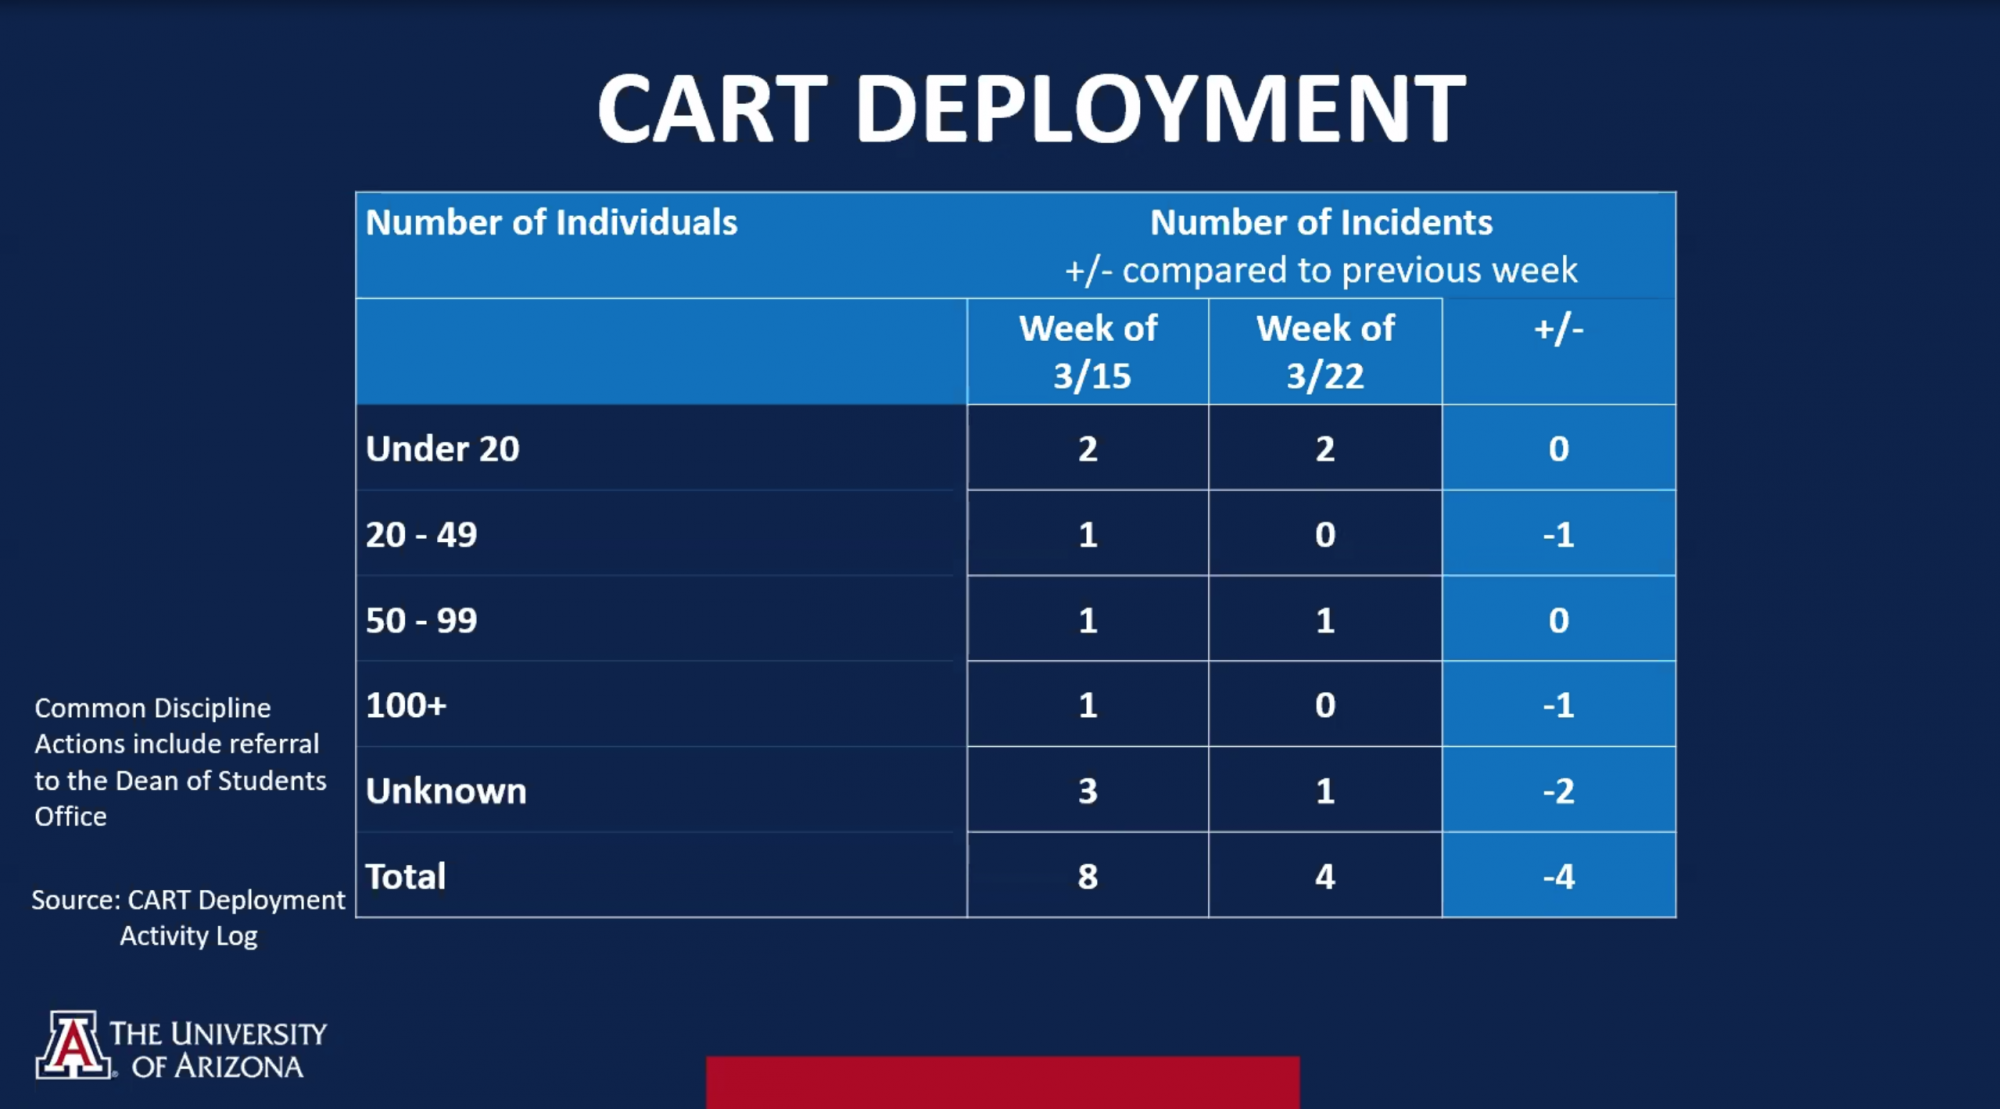 Screenshot of recent CART deployments, which indicates a decrease in deployments to large gatherings in the past week.